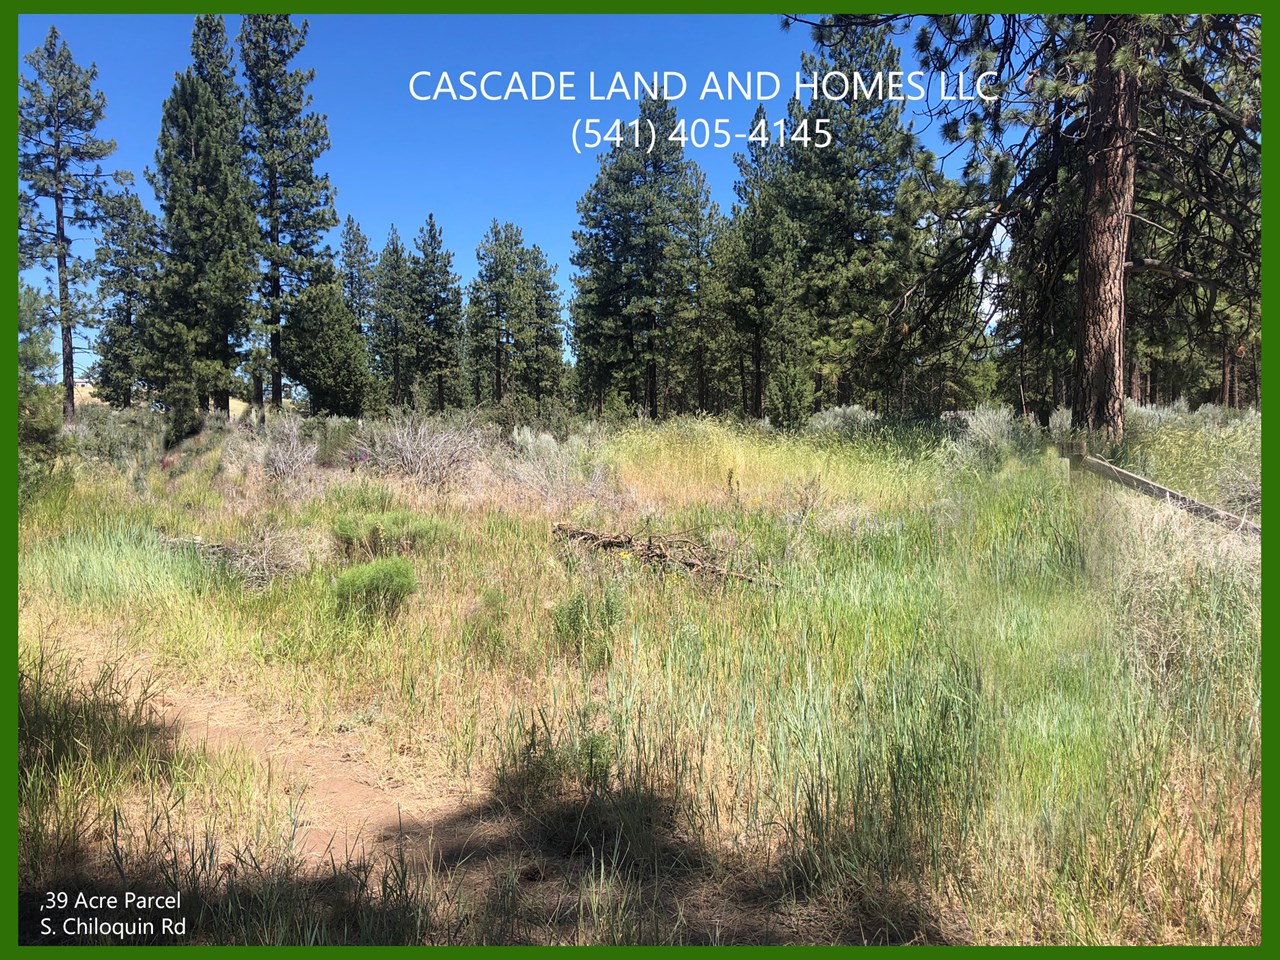 large trees around the property offer privacy and shade in the summer. there are some low growing shrubs, mostly rabbit brush and sage along with native grasses that blanket the property.